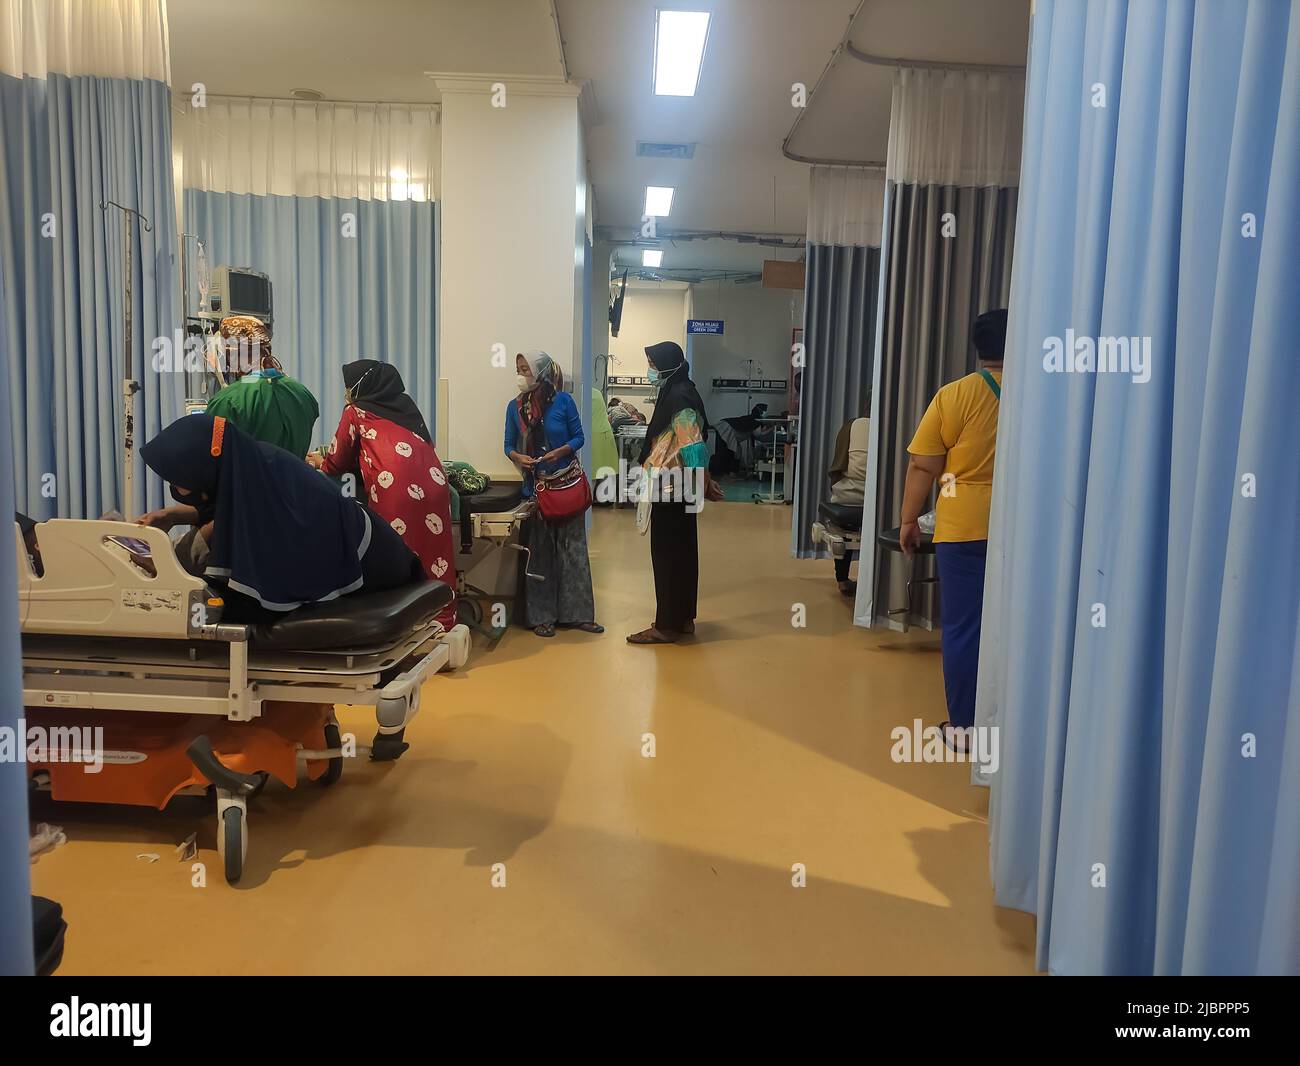 atmosphere in the emergency room at the hospital.  the patient is being examined by a doctor and accompanied by his family Stock Photo